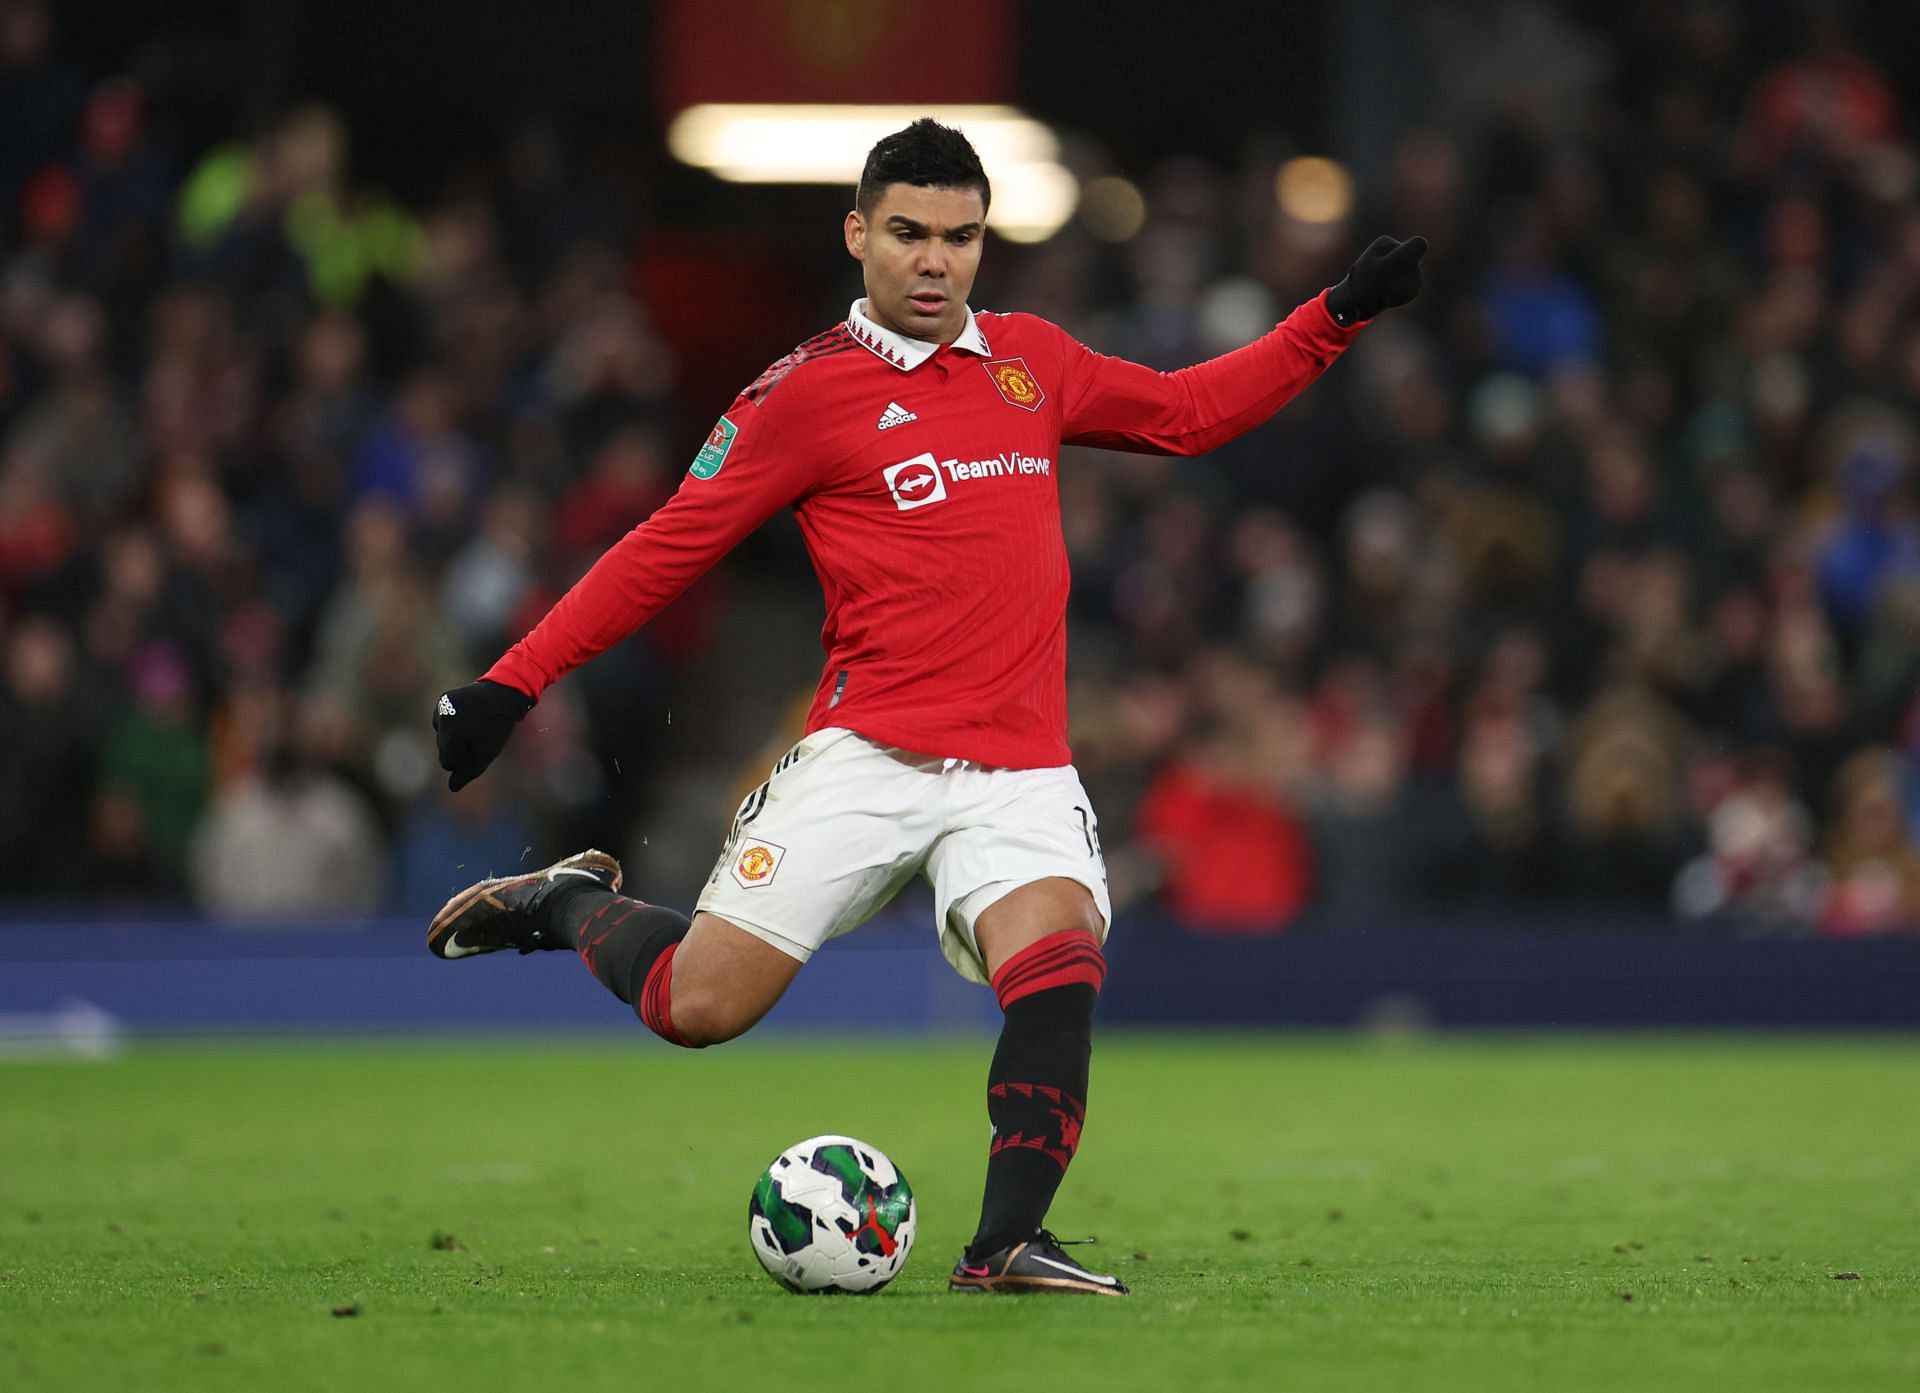 Casemiro has hit the ground running since arriving at Old Trafford last summer.